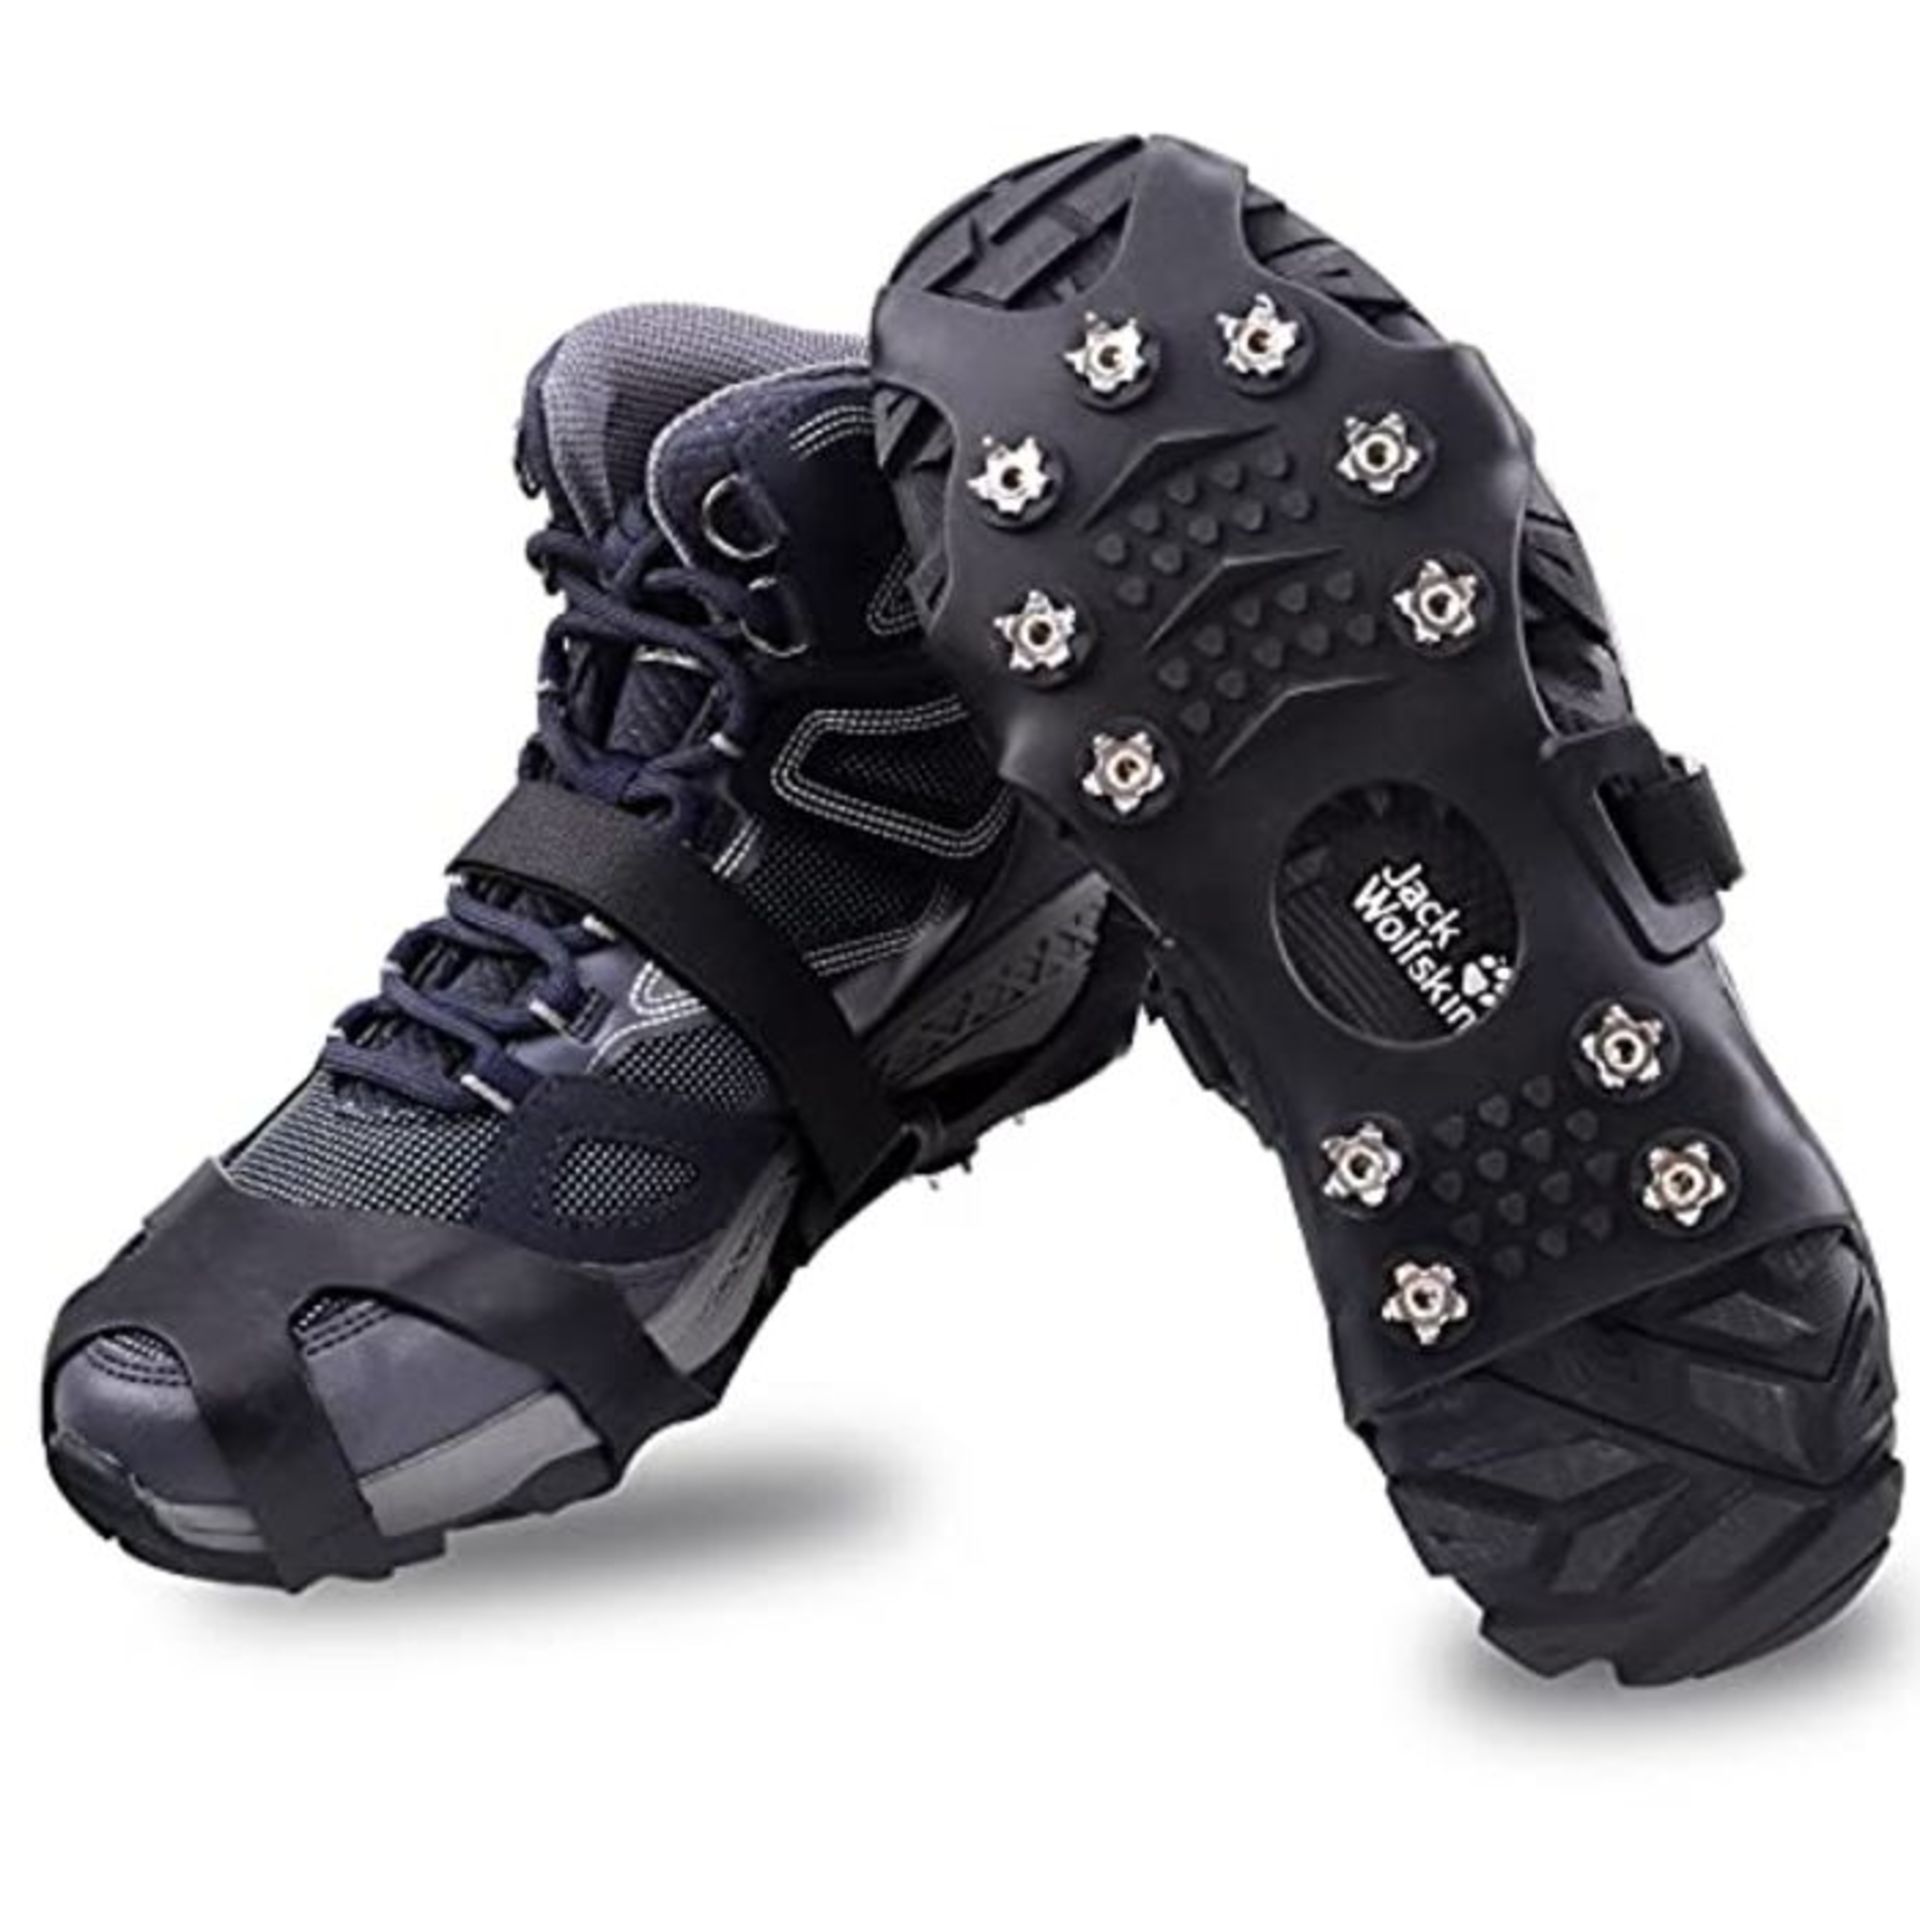 Lechin Shoe spikes for the winter crampons made of cold-resistant and durable organic